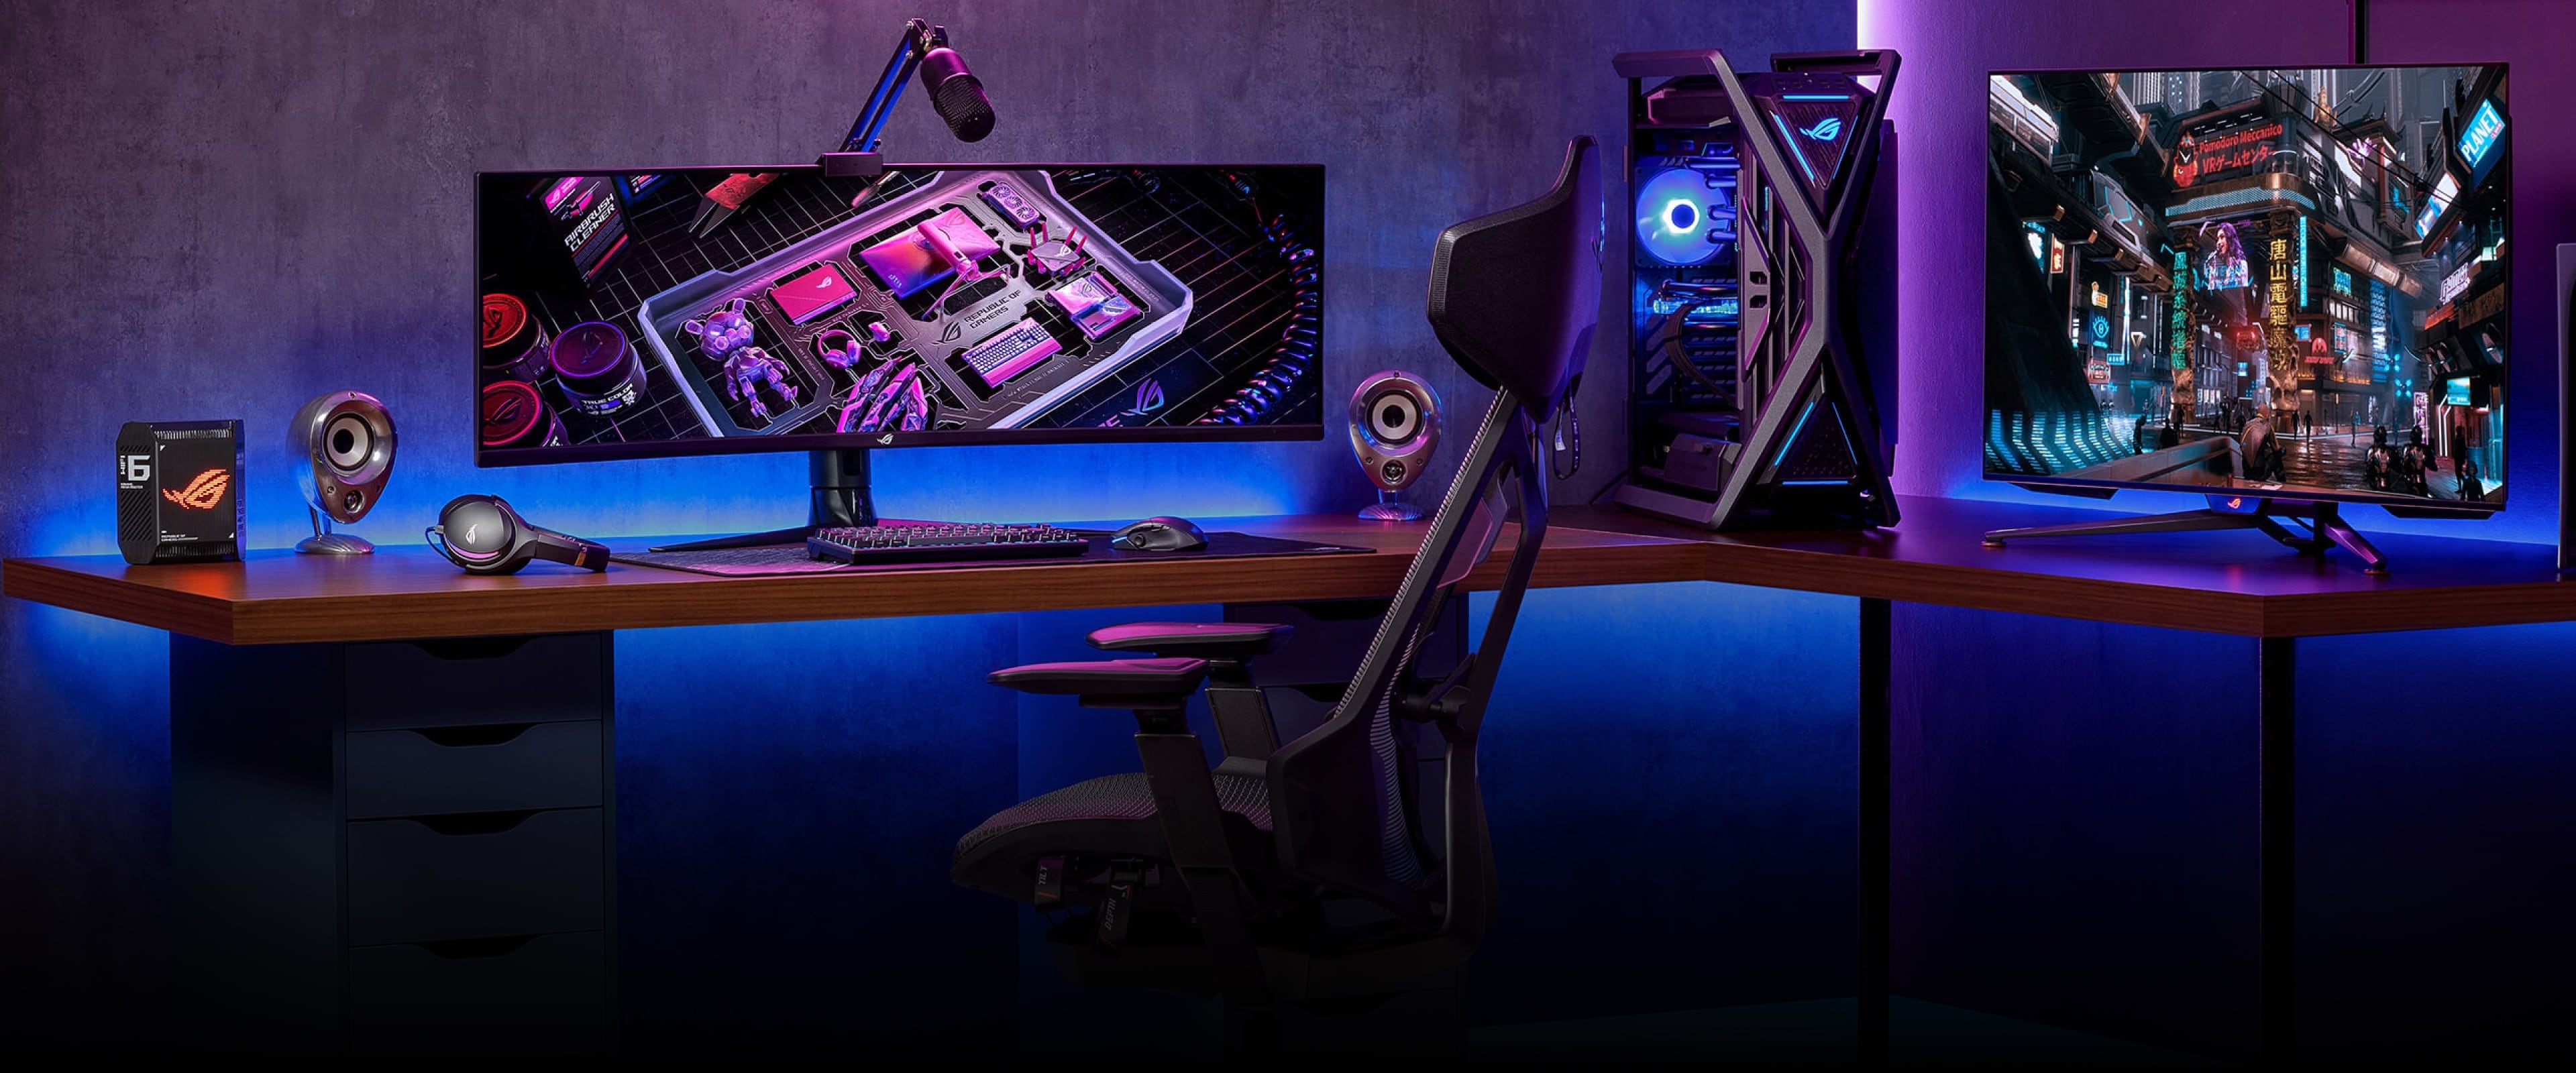 ROG gaming setup with a PC,  monitor, a keyboard and mouse set, and a headset